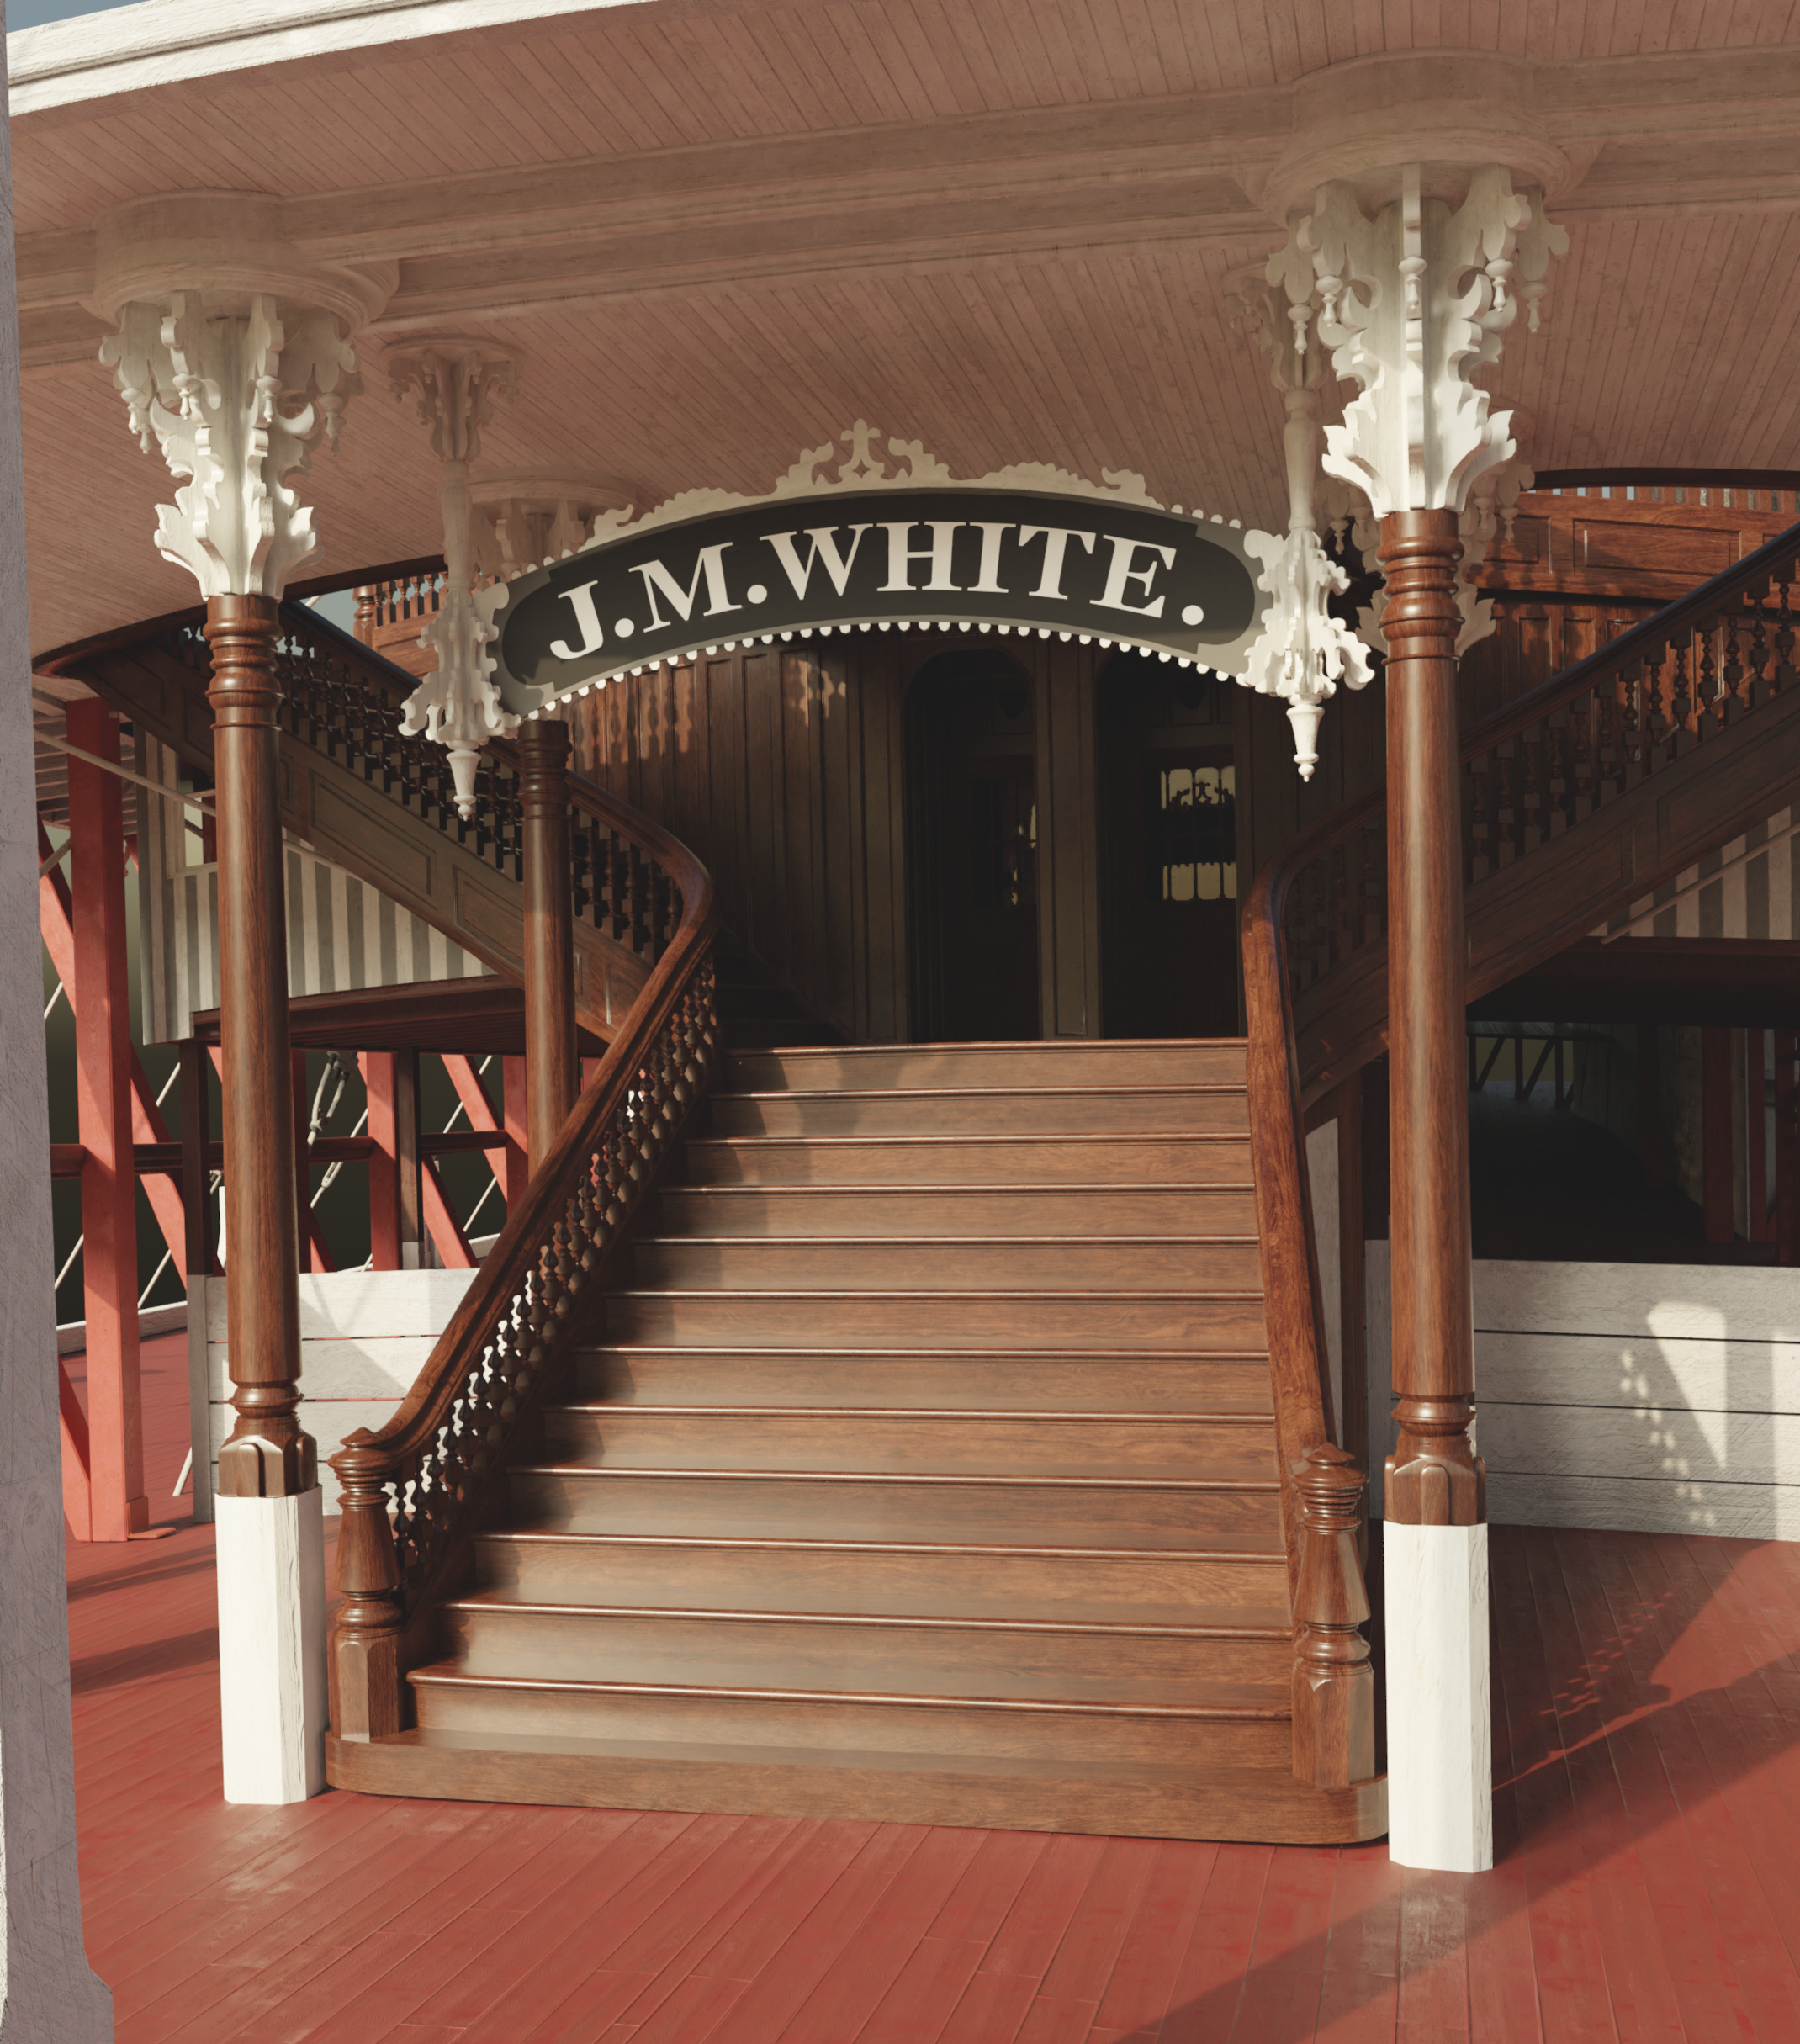 J.M. White: Grand staircase - Rendering by Jens Mittelbach, CC BY 4.0